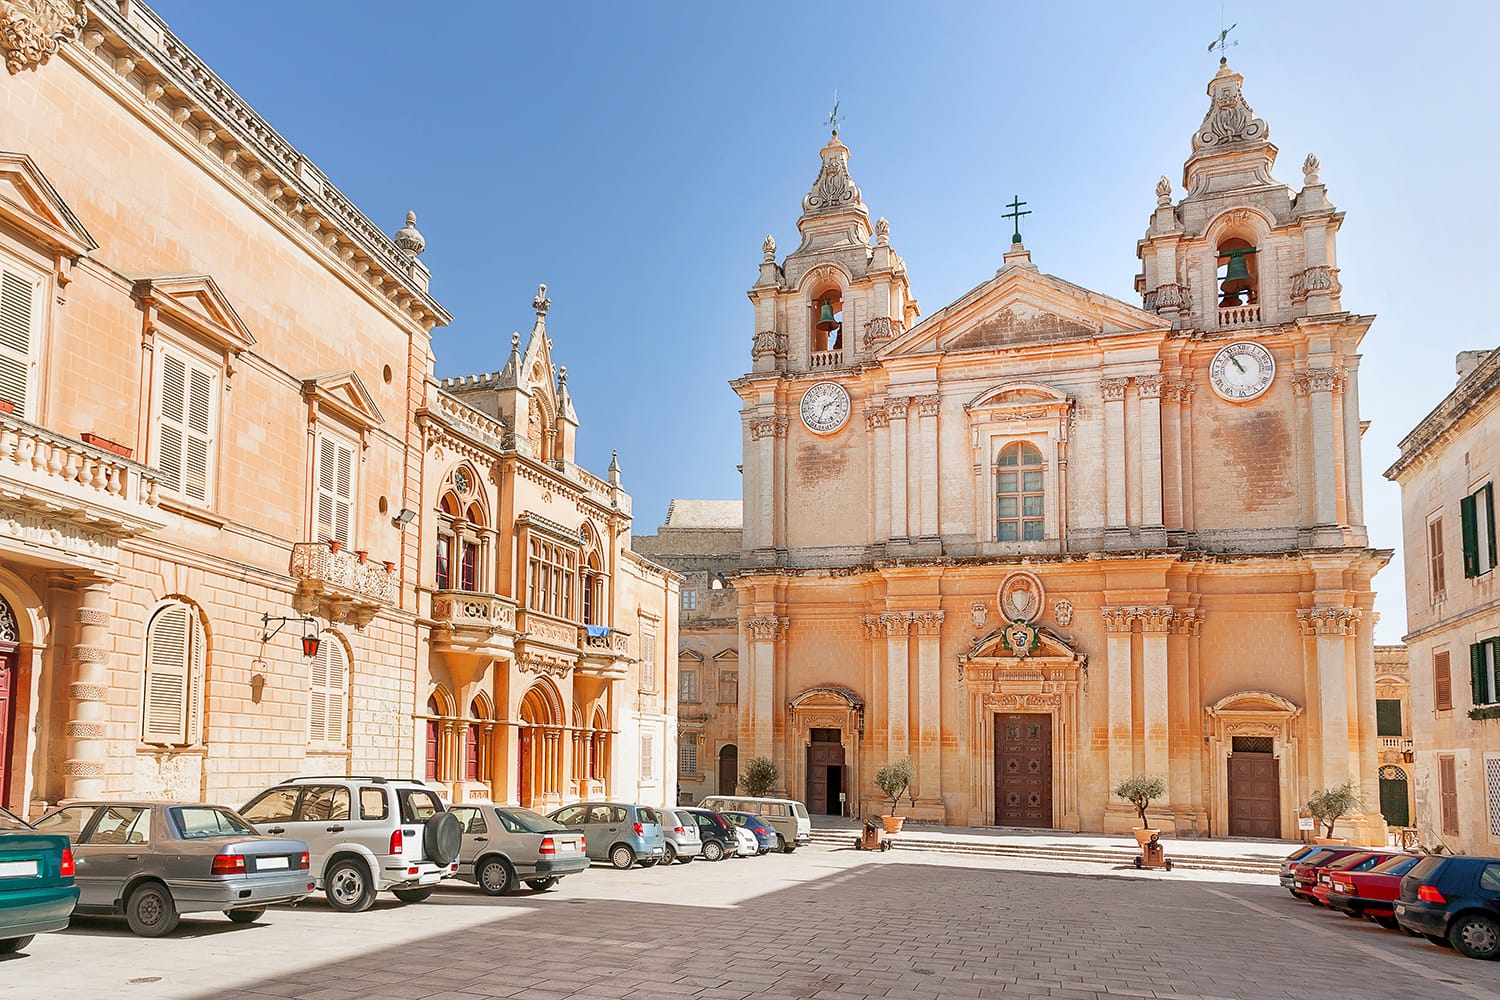 The St. Paul's Cathedral in Malta's old capital Mdina.